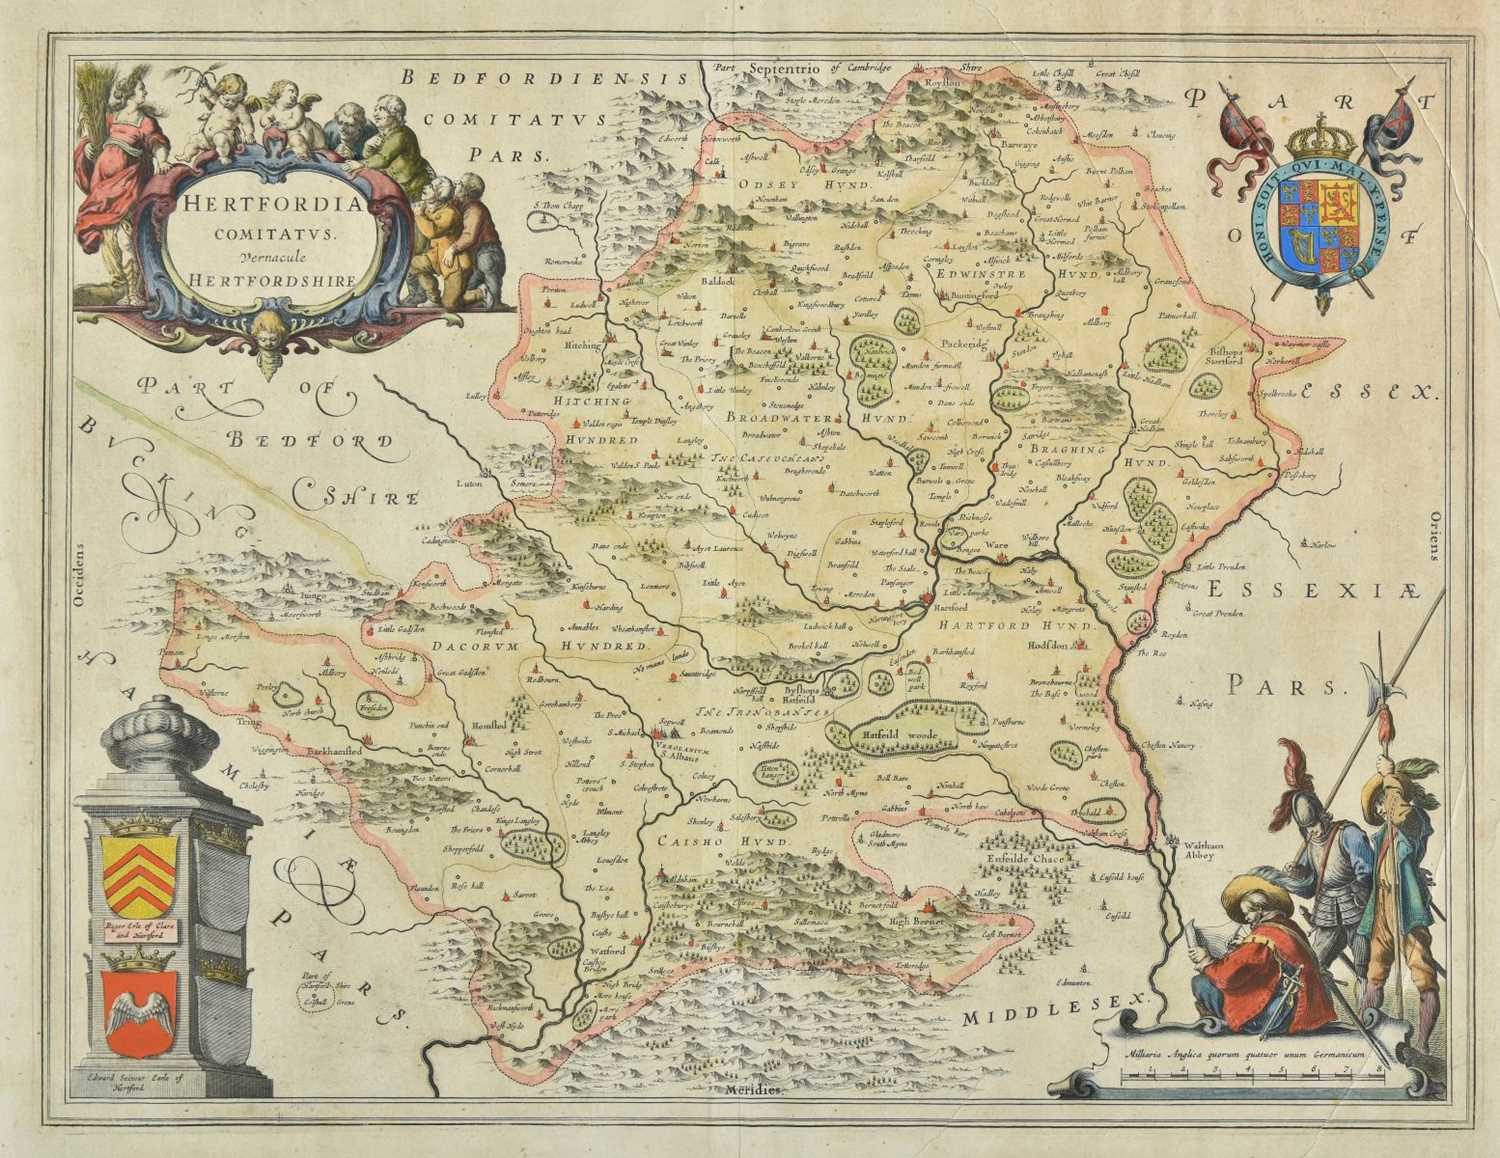 Lot 48 - Hertfordshire. Four engraved maps, 17th - 19th century